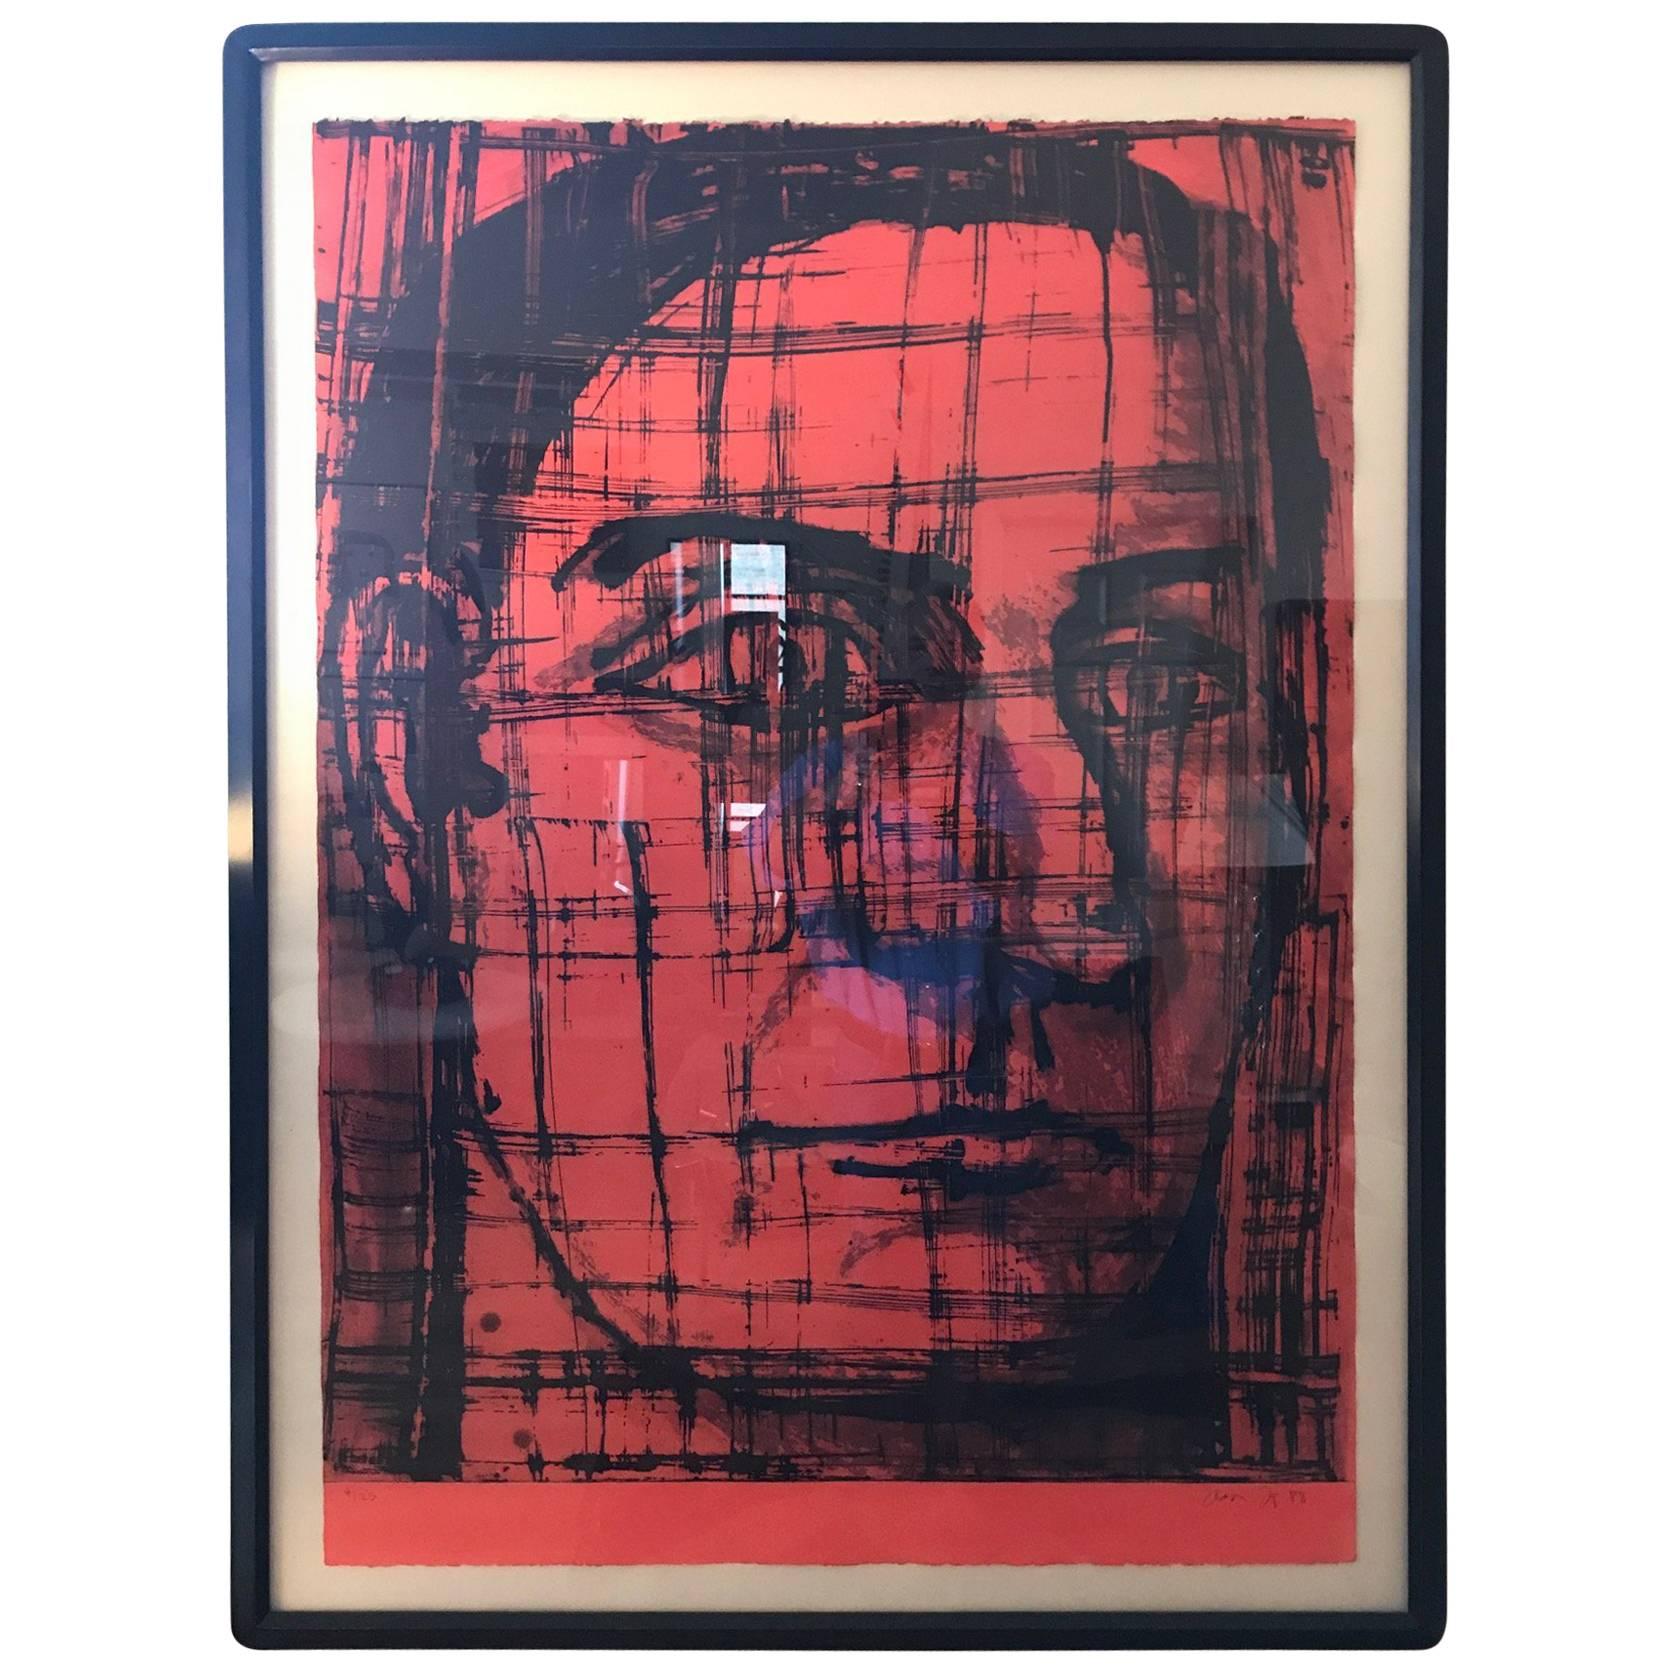 Large Red and Black Portrait Lithograph by Aaron Fink